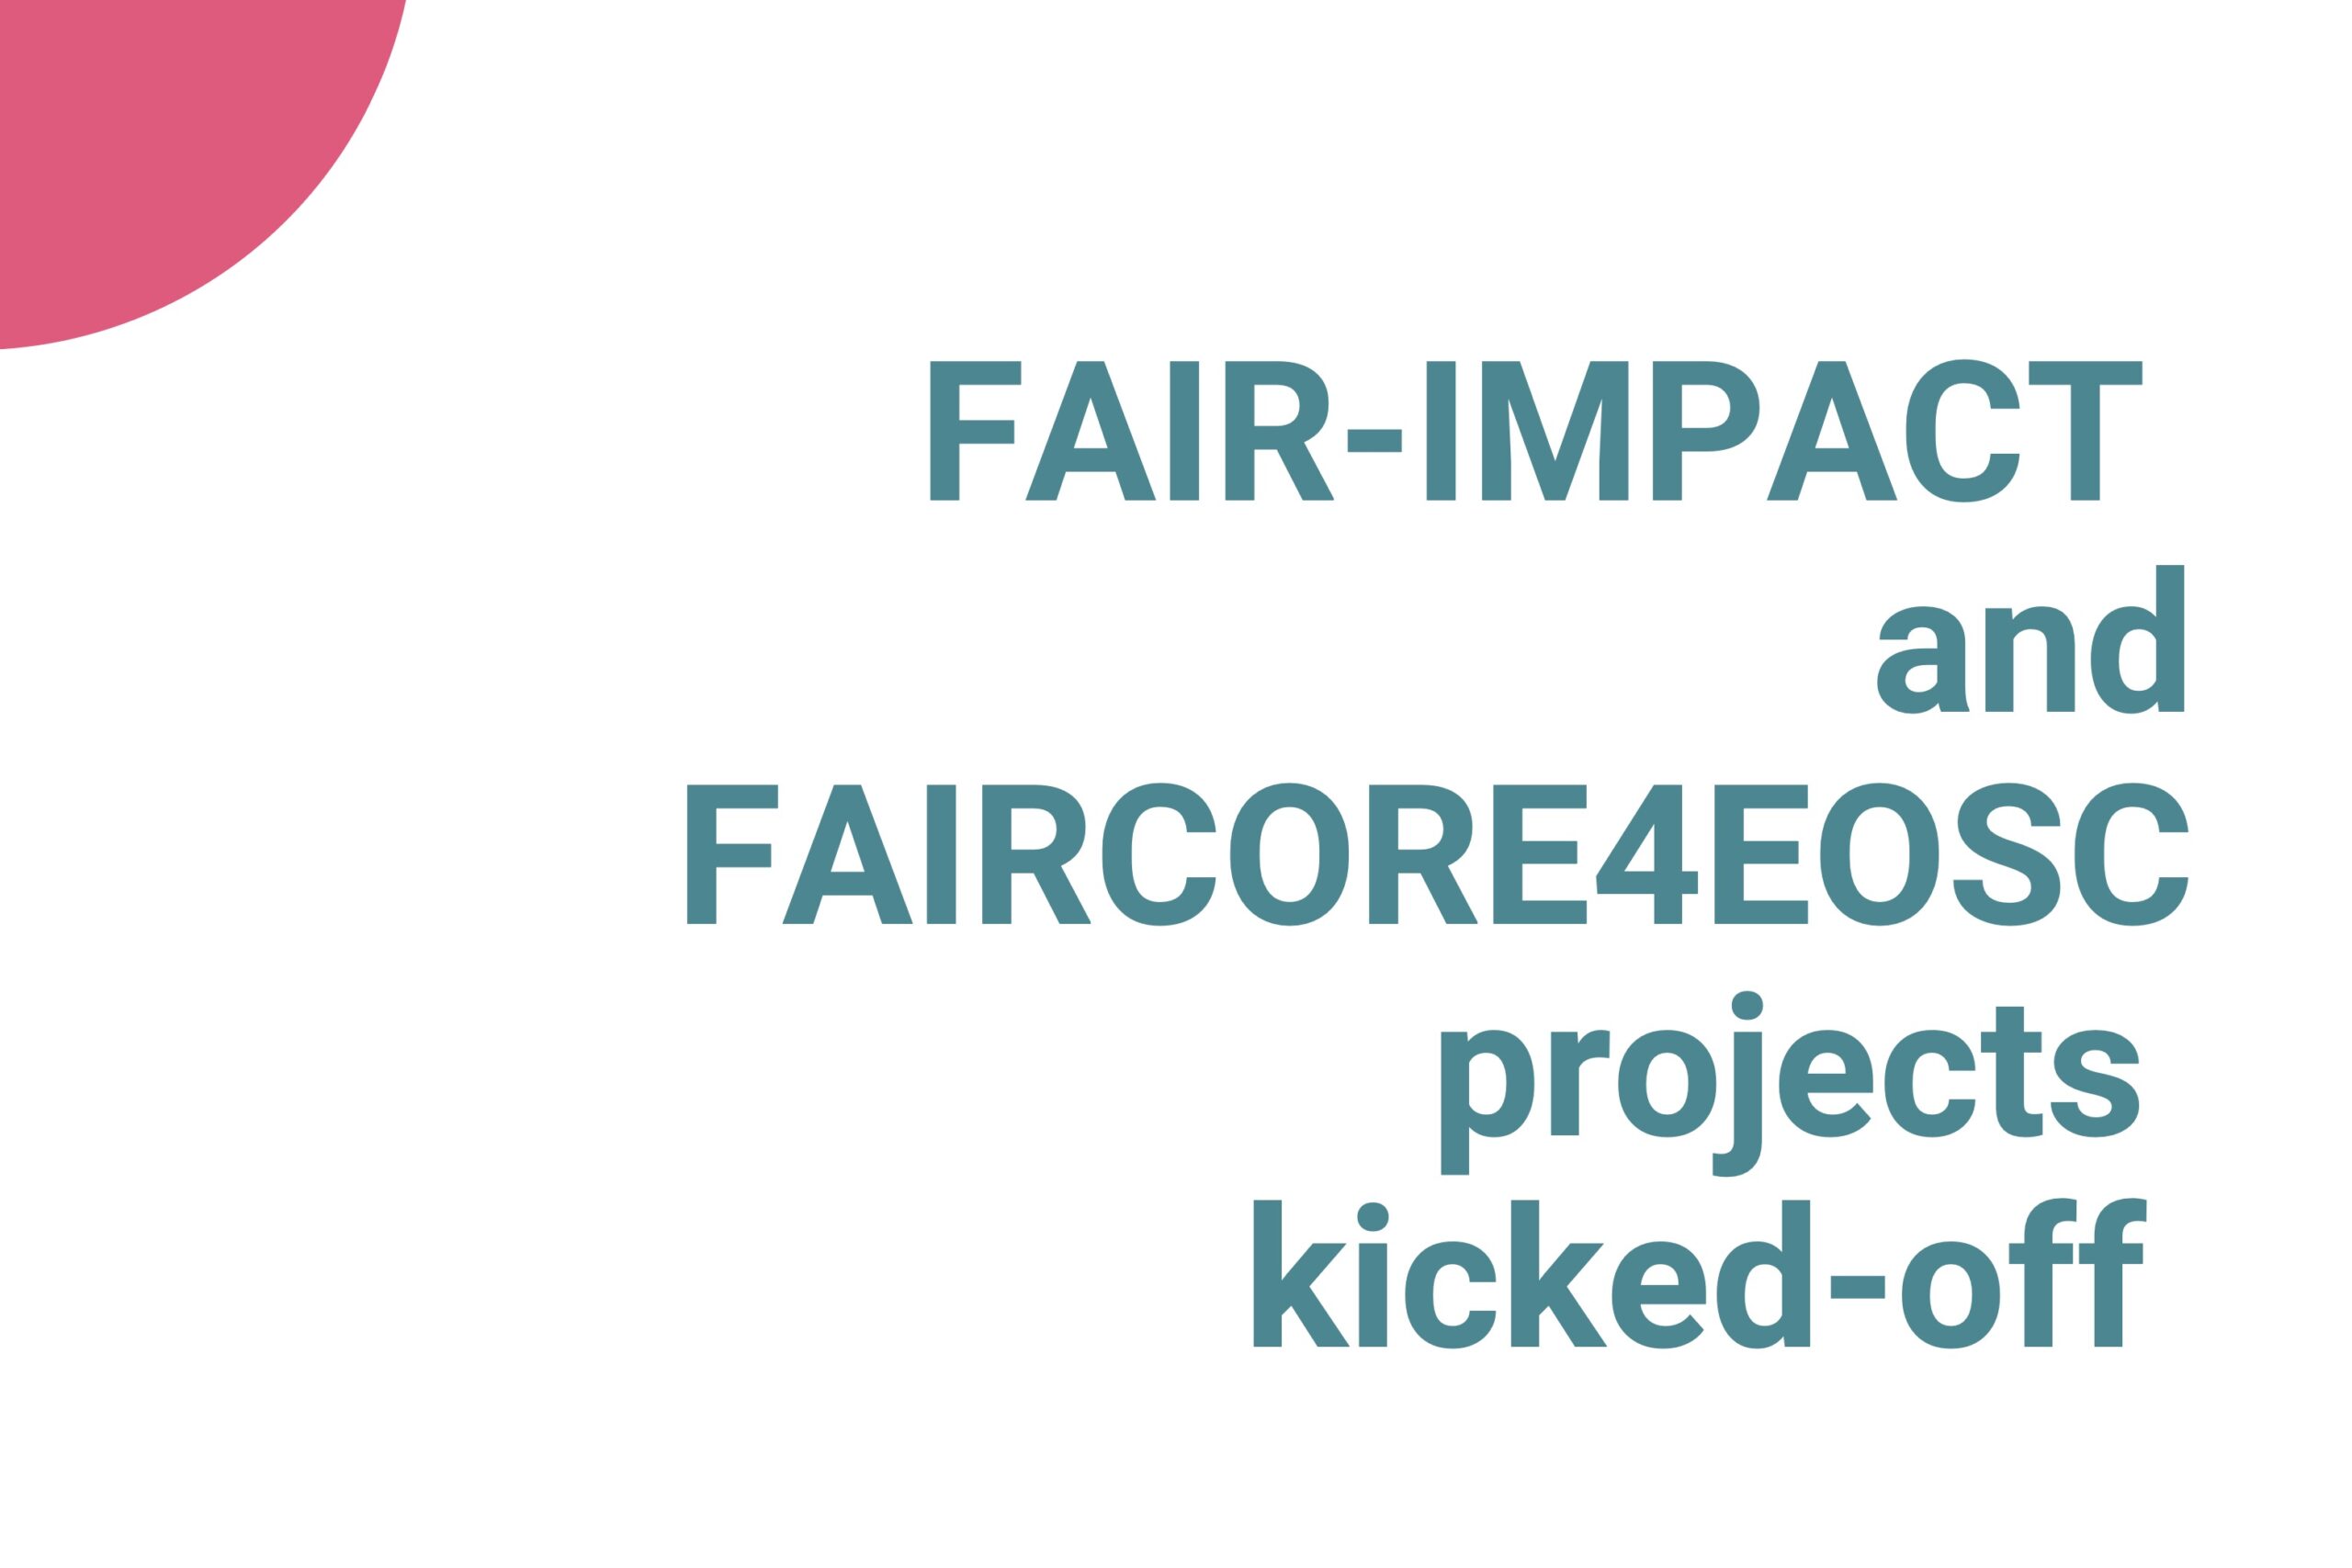 FAIR projects